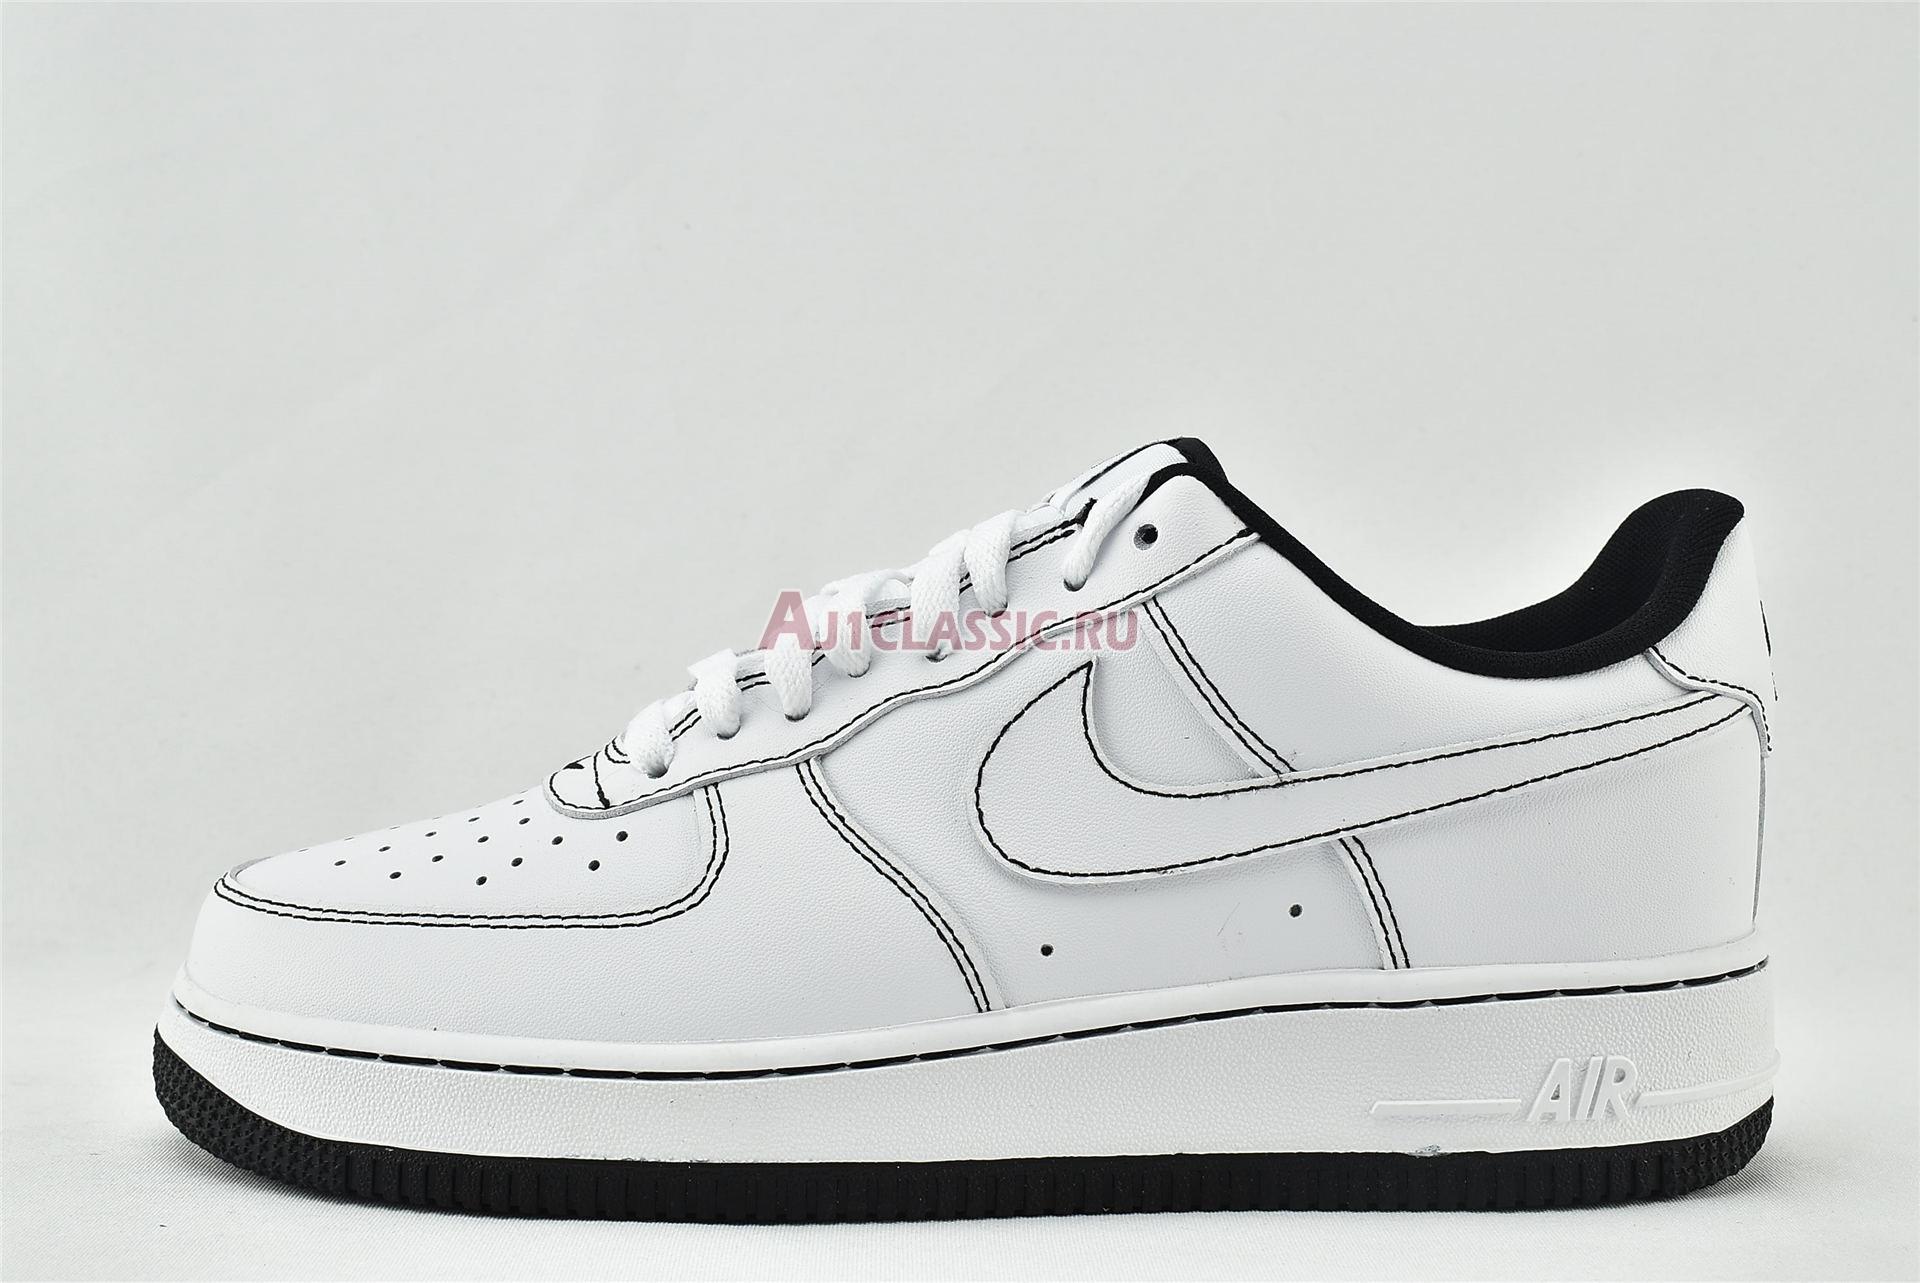 Nike Air Force 1 Low 07 "Contrast Stitch" CV1724-104